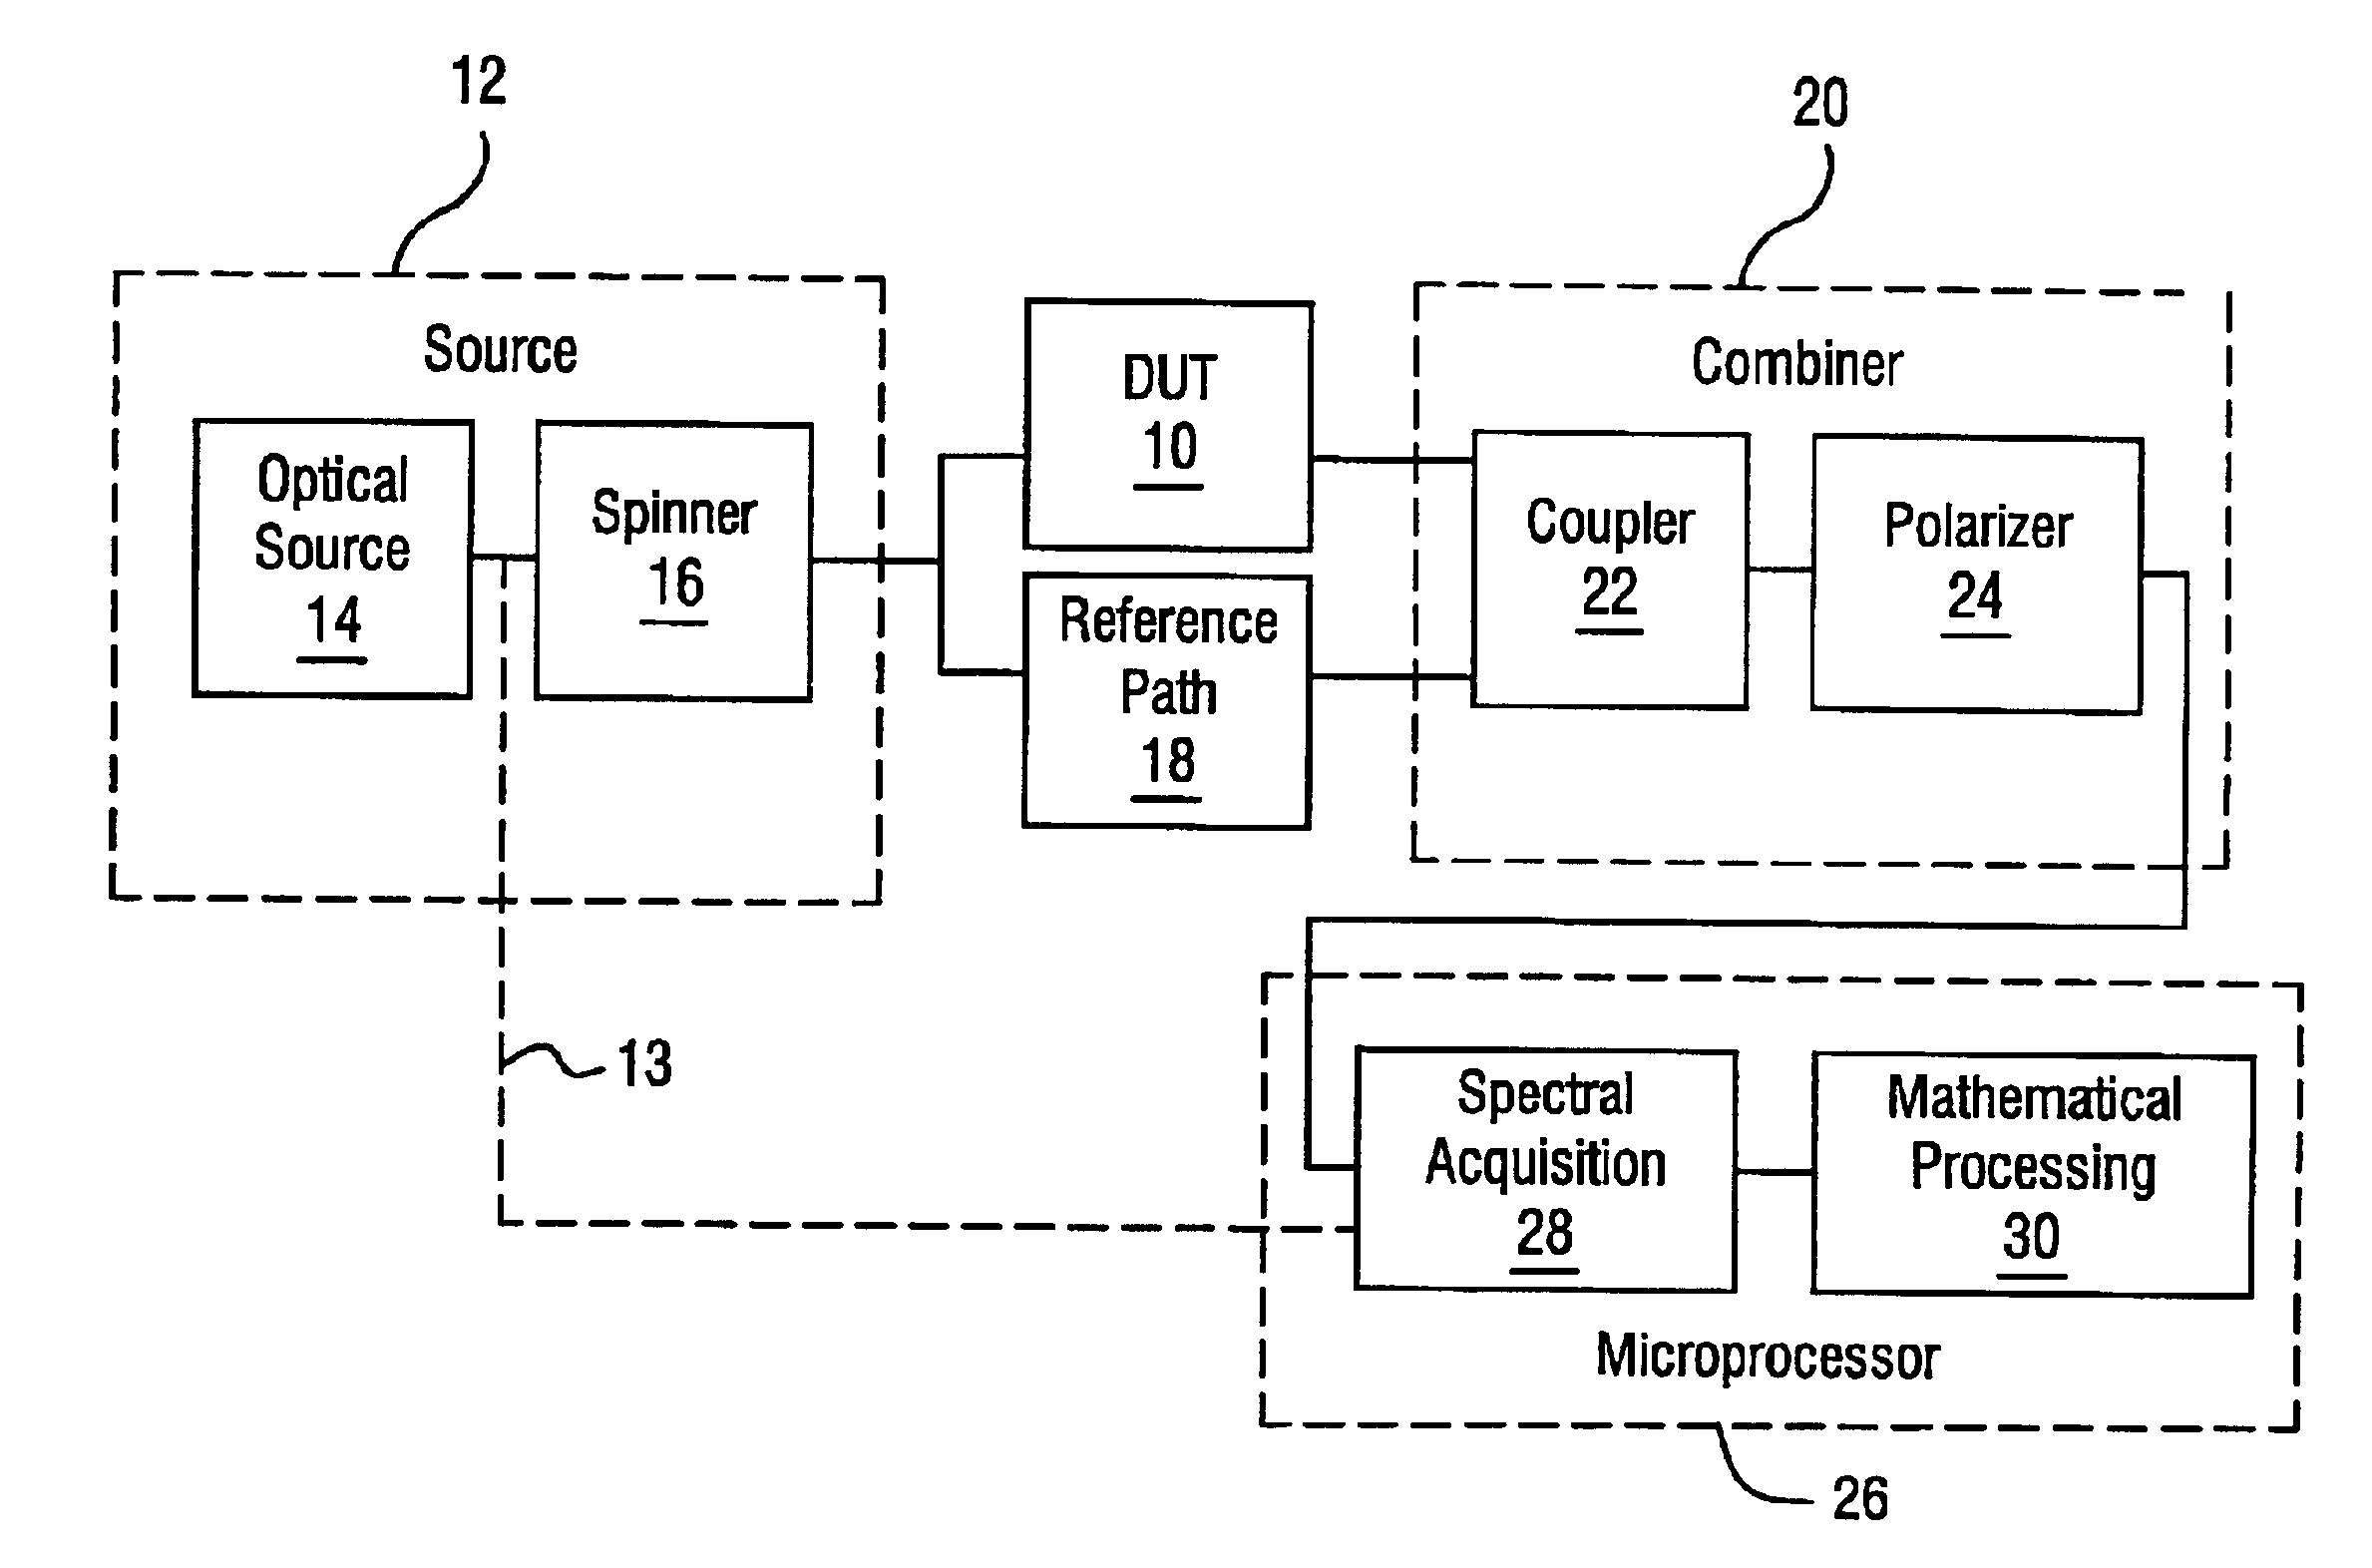 Apparatus and method for the complete characterization of optical devices including loss, birefringence and dispersion effects